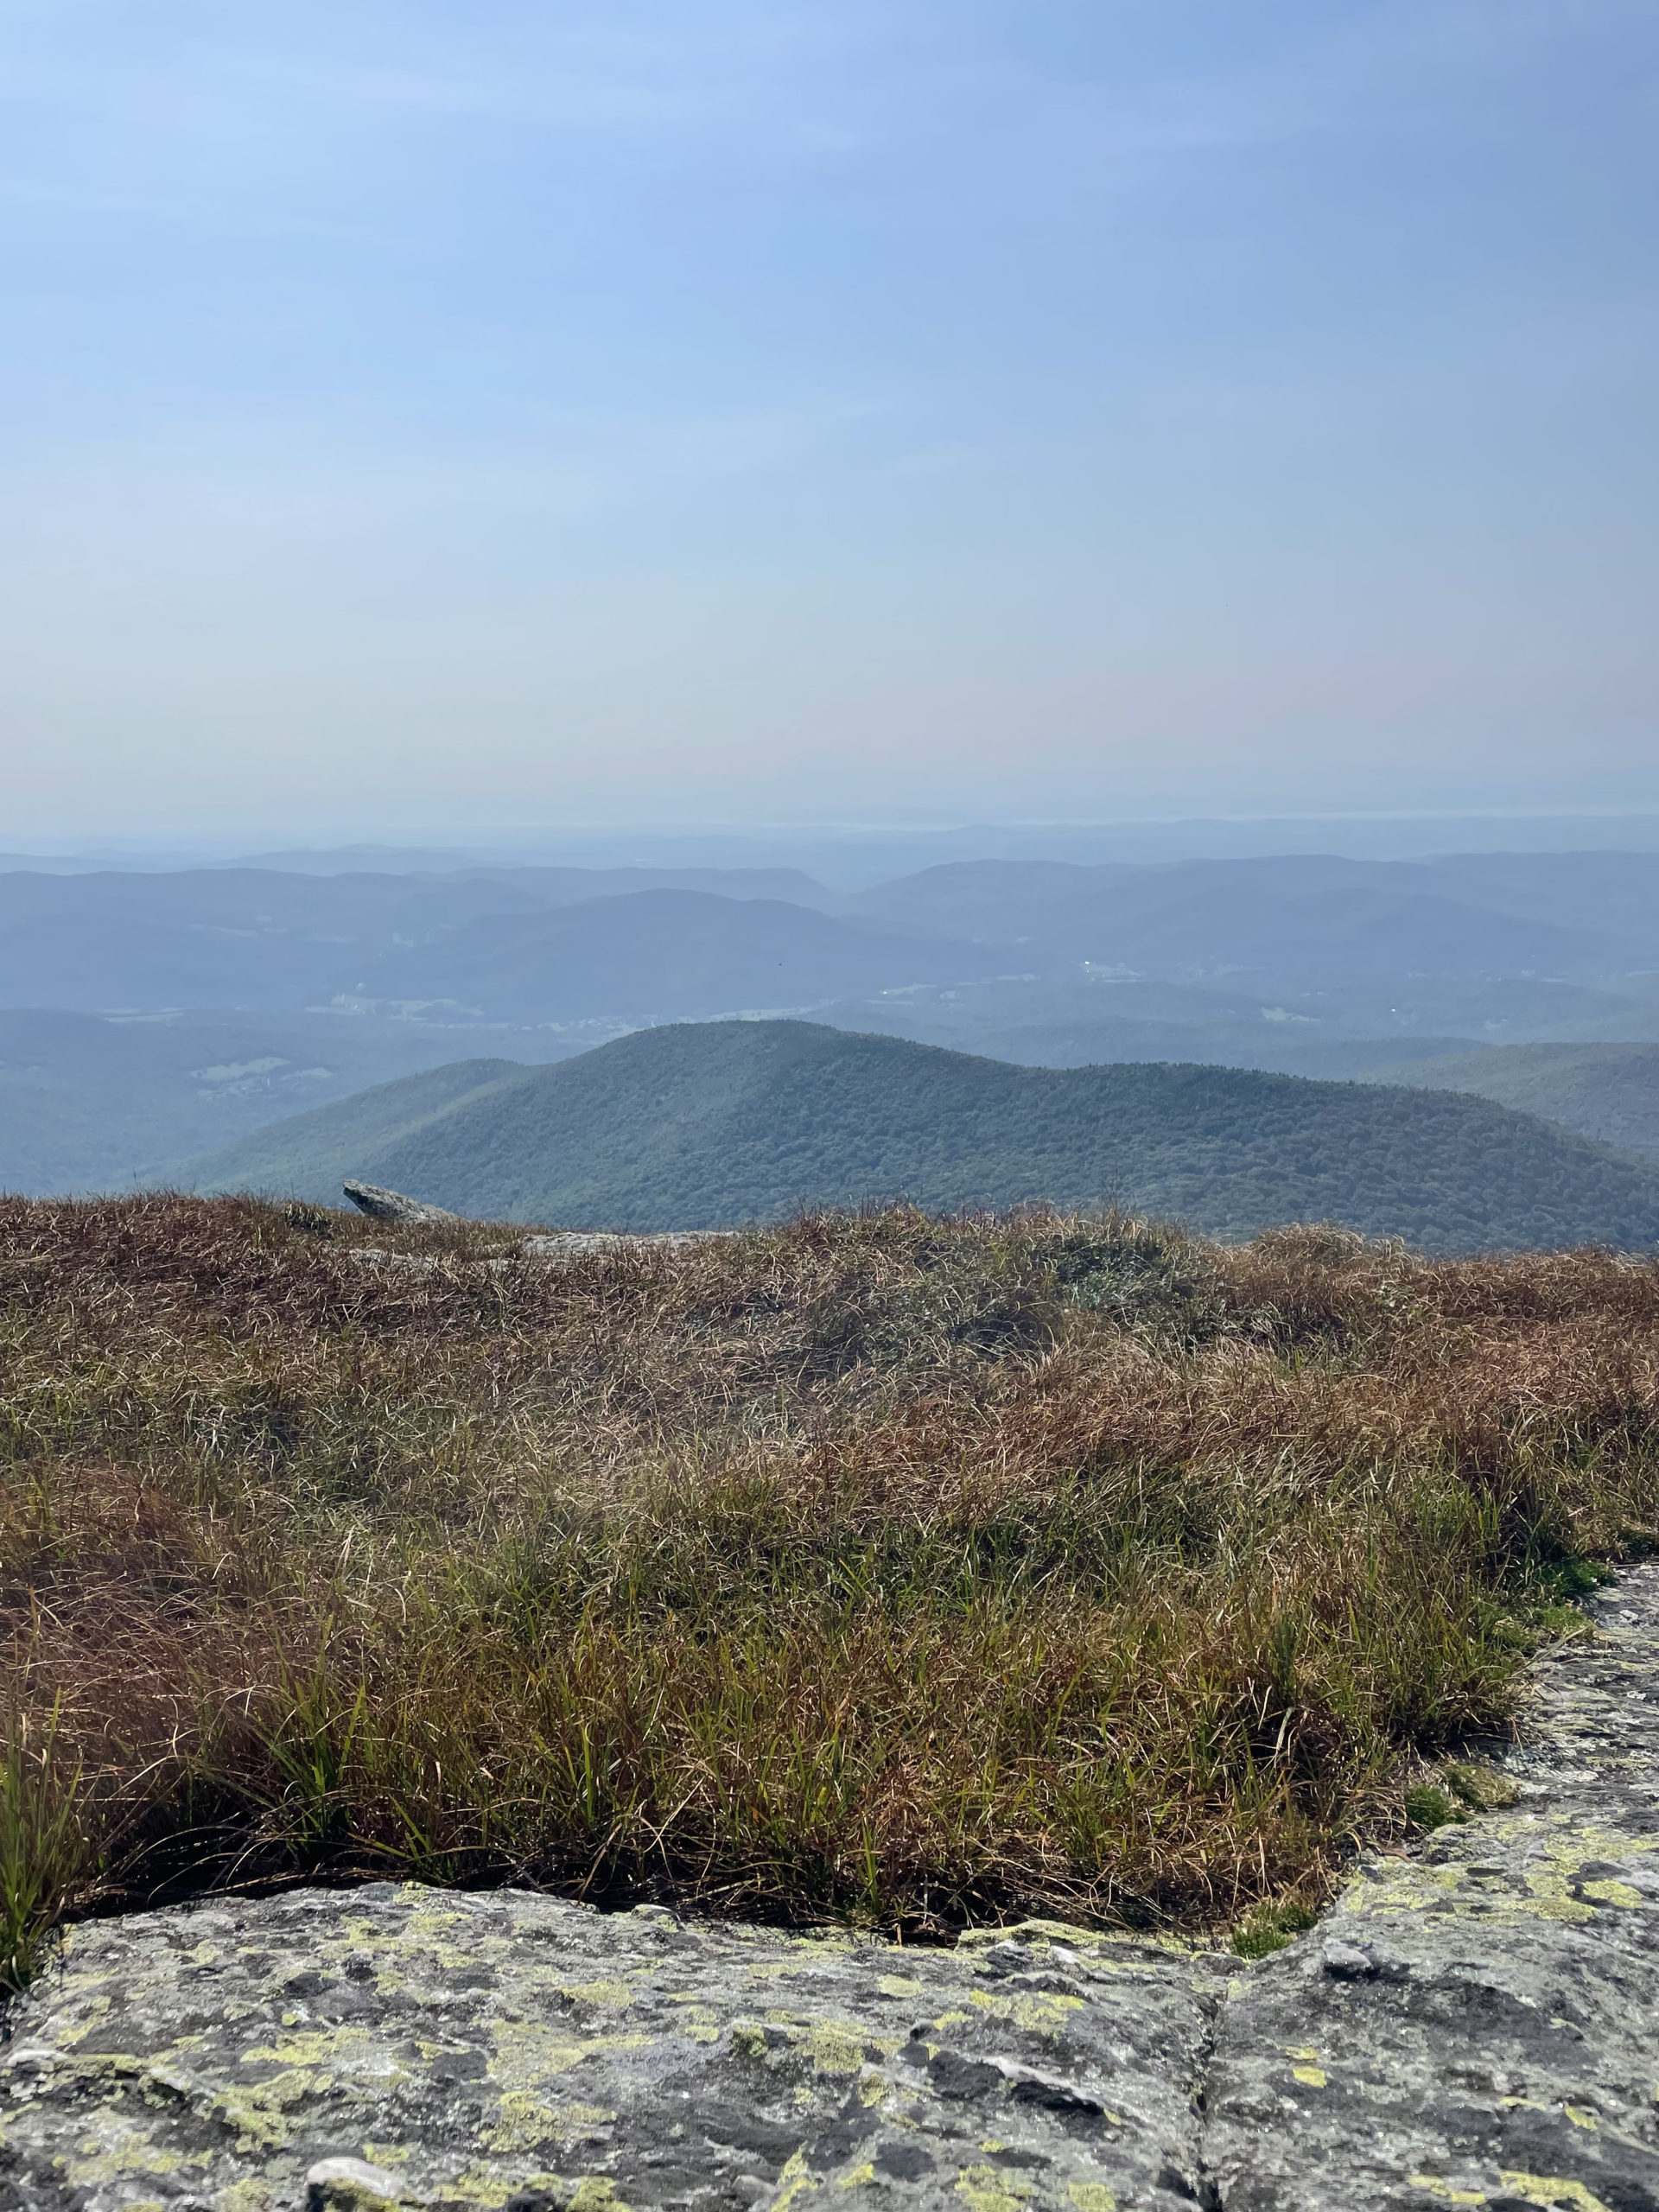 View from the summit, seen while hiking Camel's Hump in the Green Mountains, Vermont